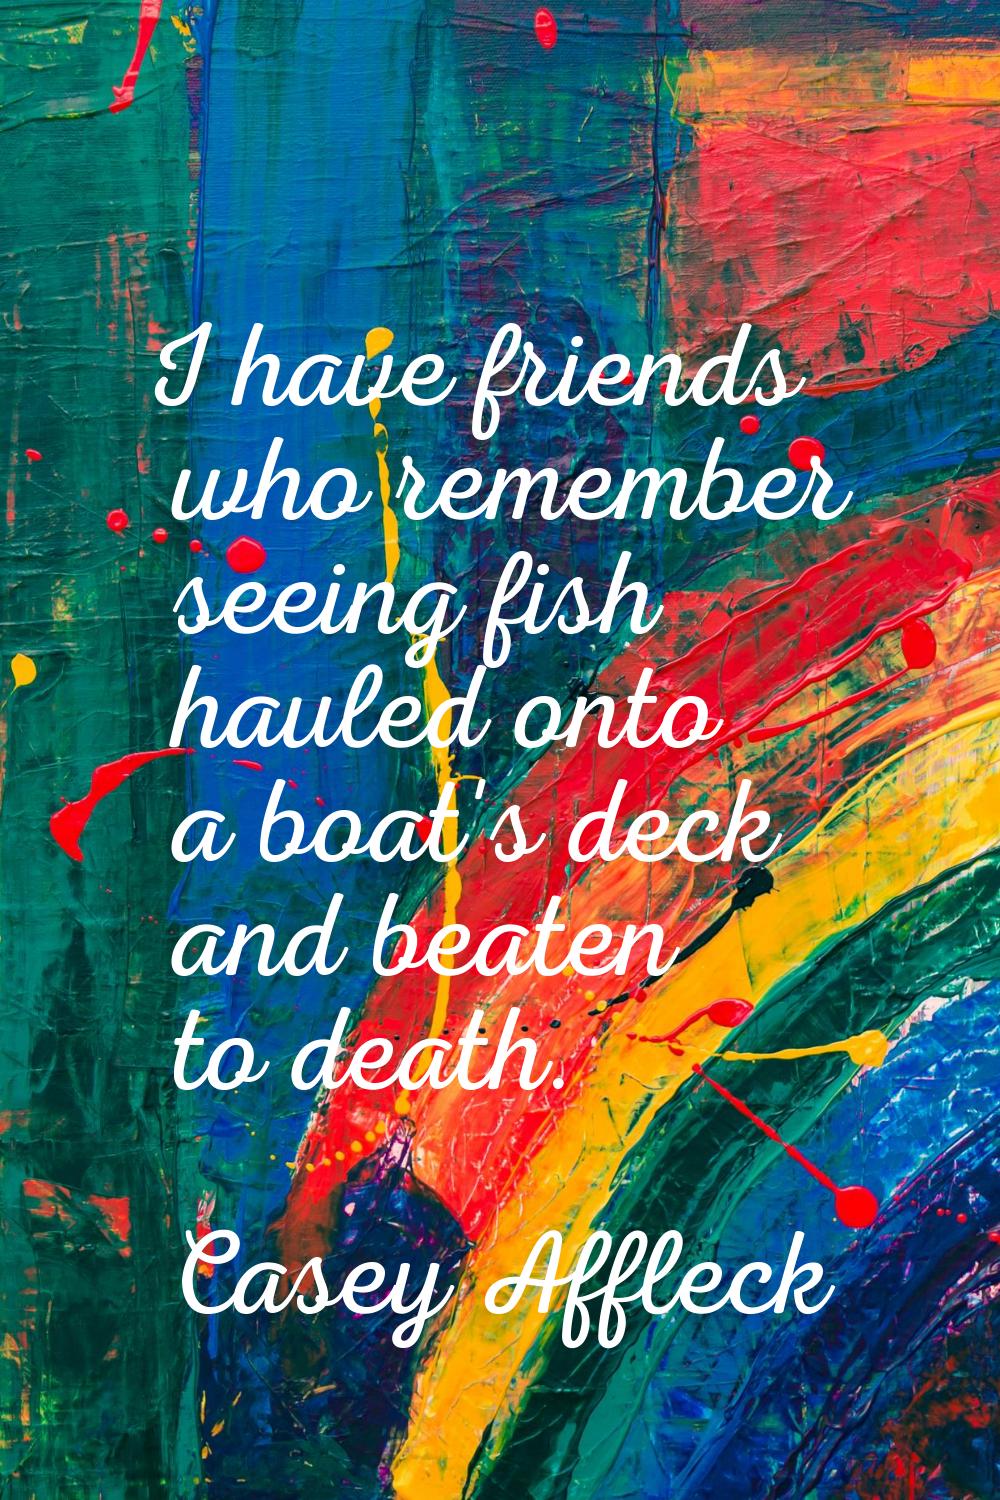 I have friends who remember seeing fish hauled onto a boat's deck and beaten to death.